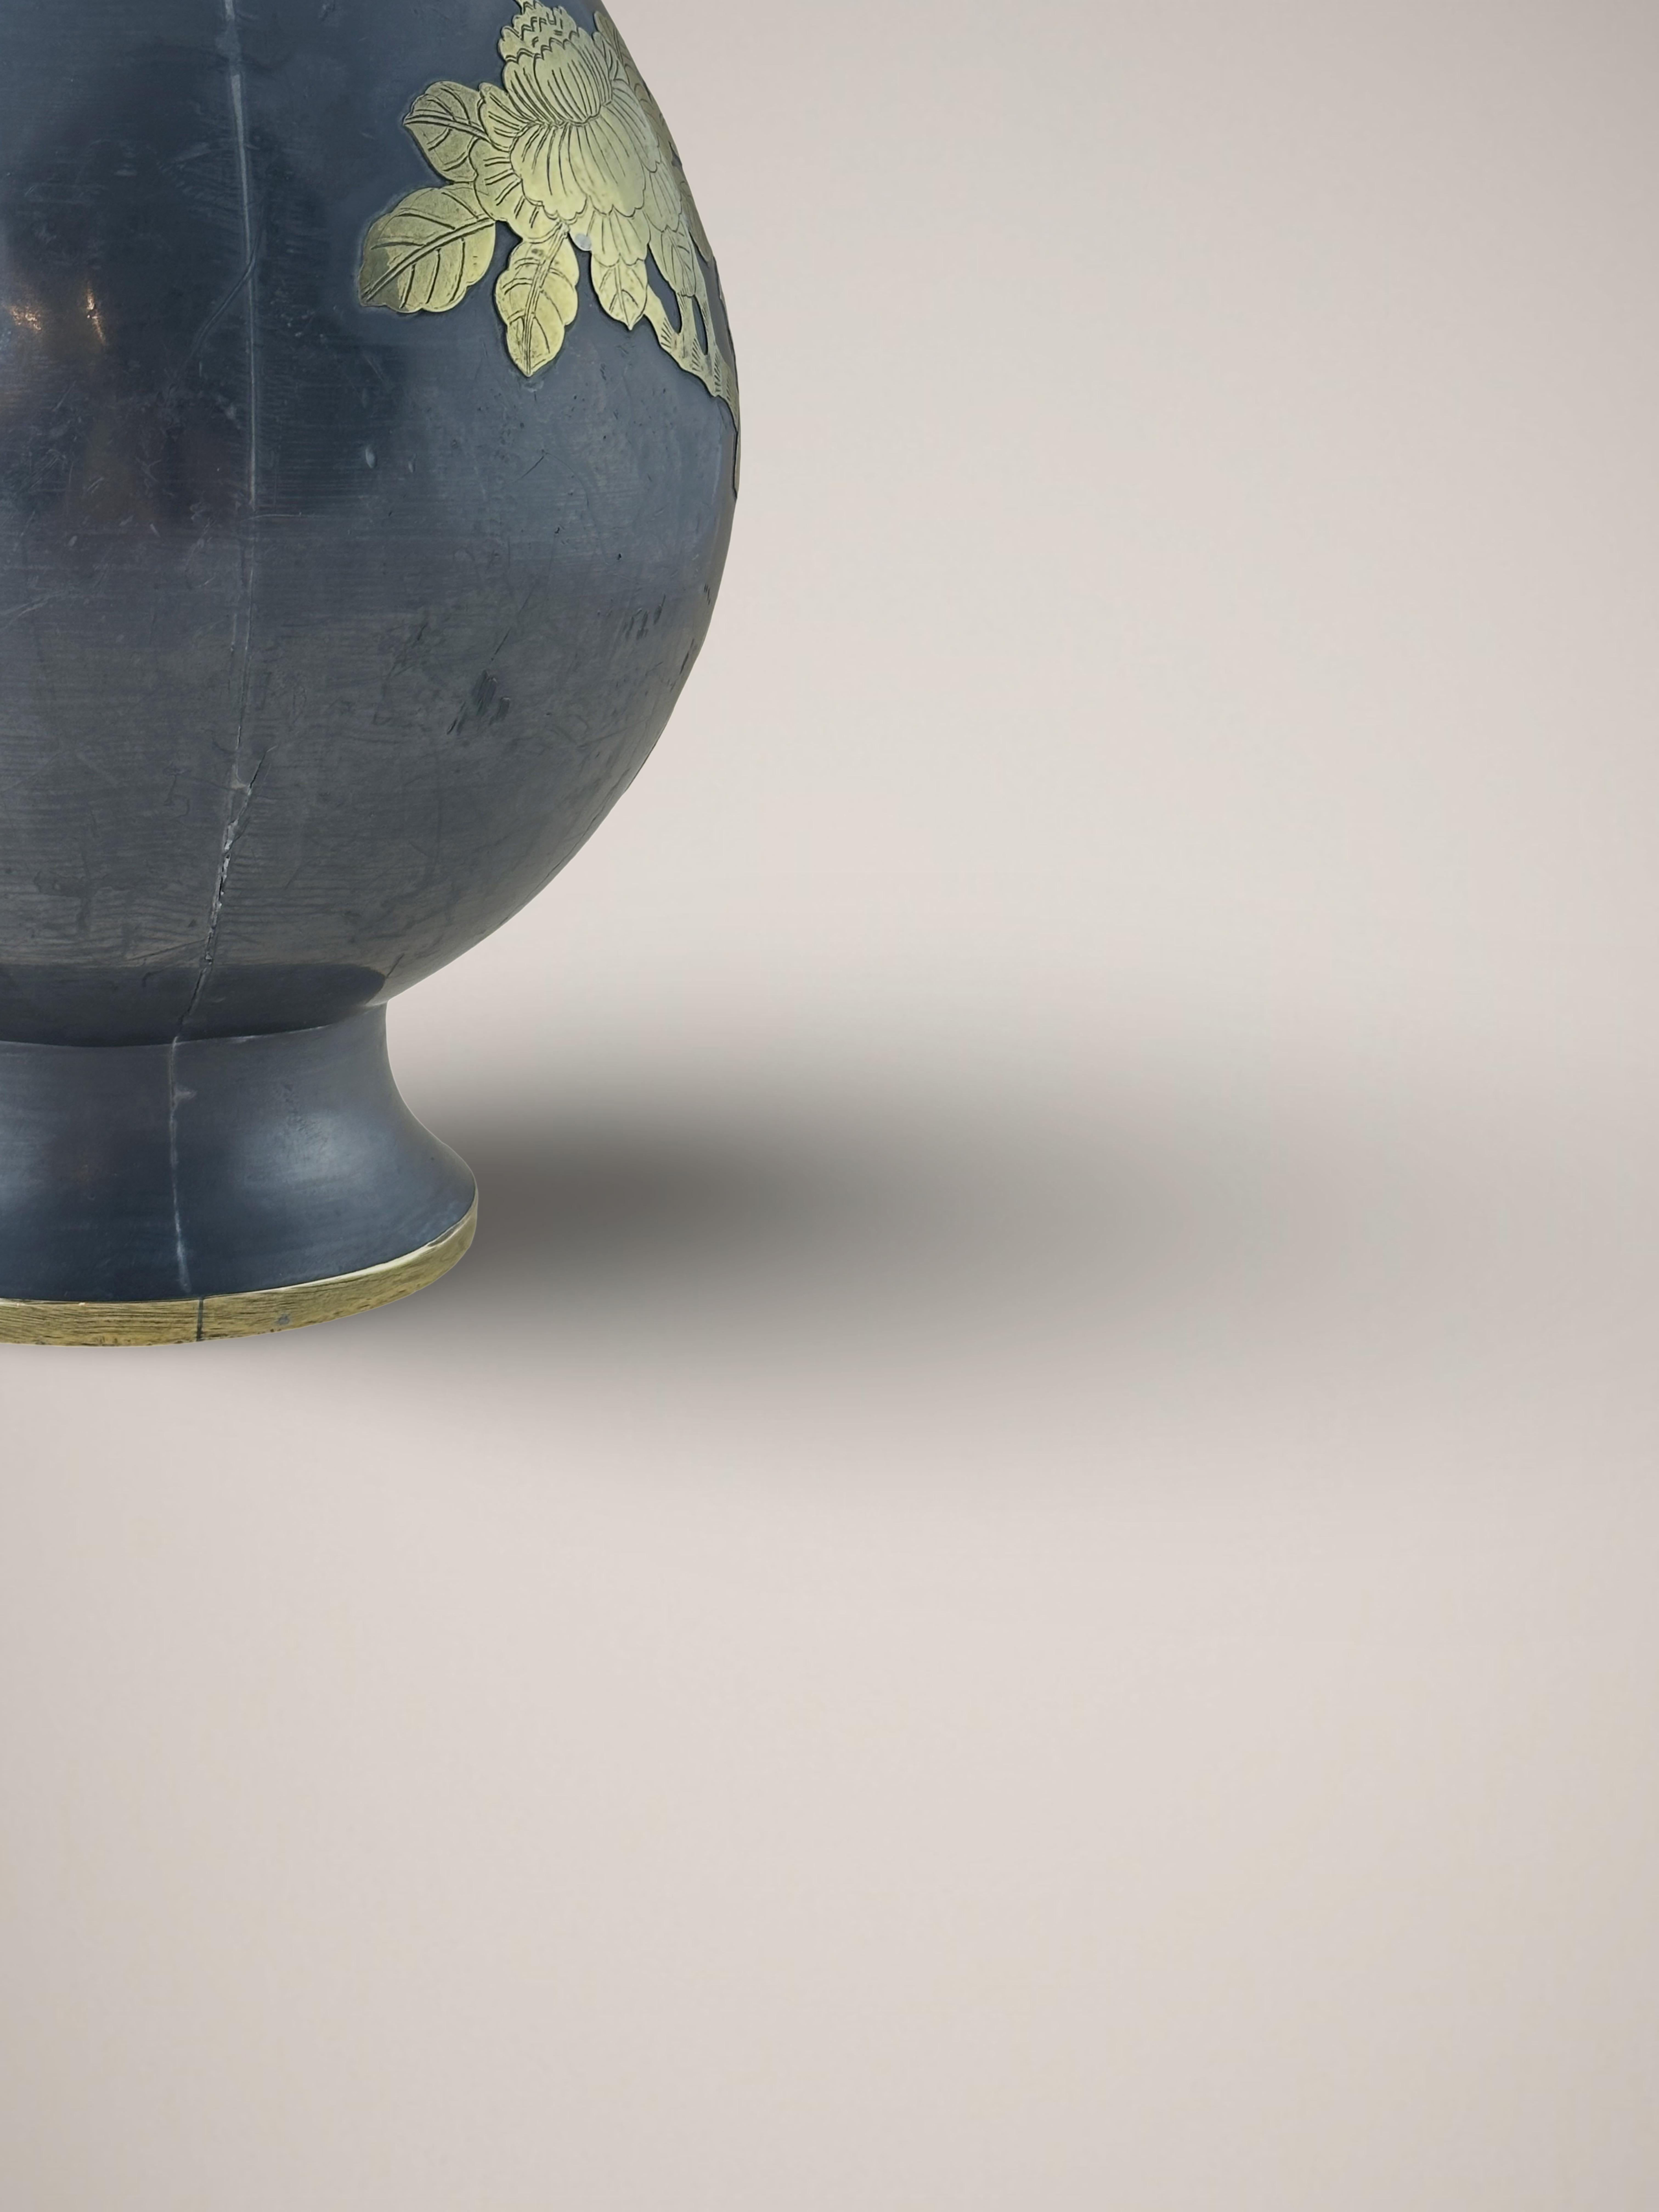 Mid-20th Century Chinese Mid-Century Pewter and Brass Baluster Vase  For Sale